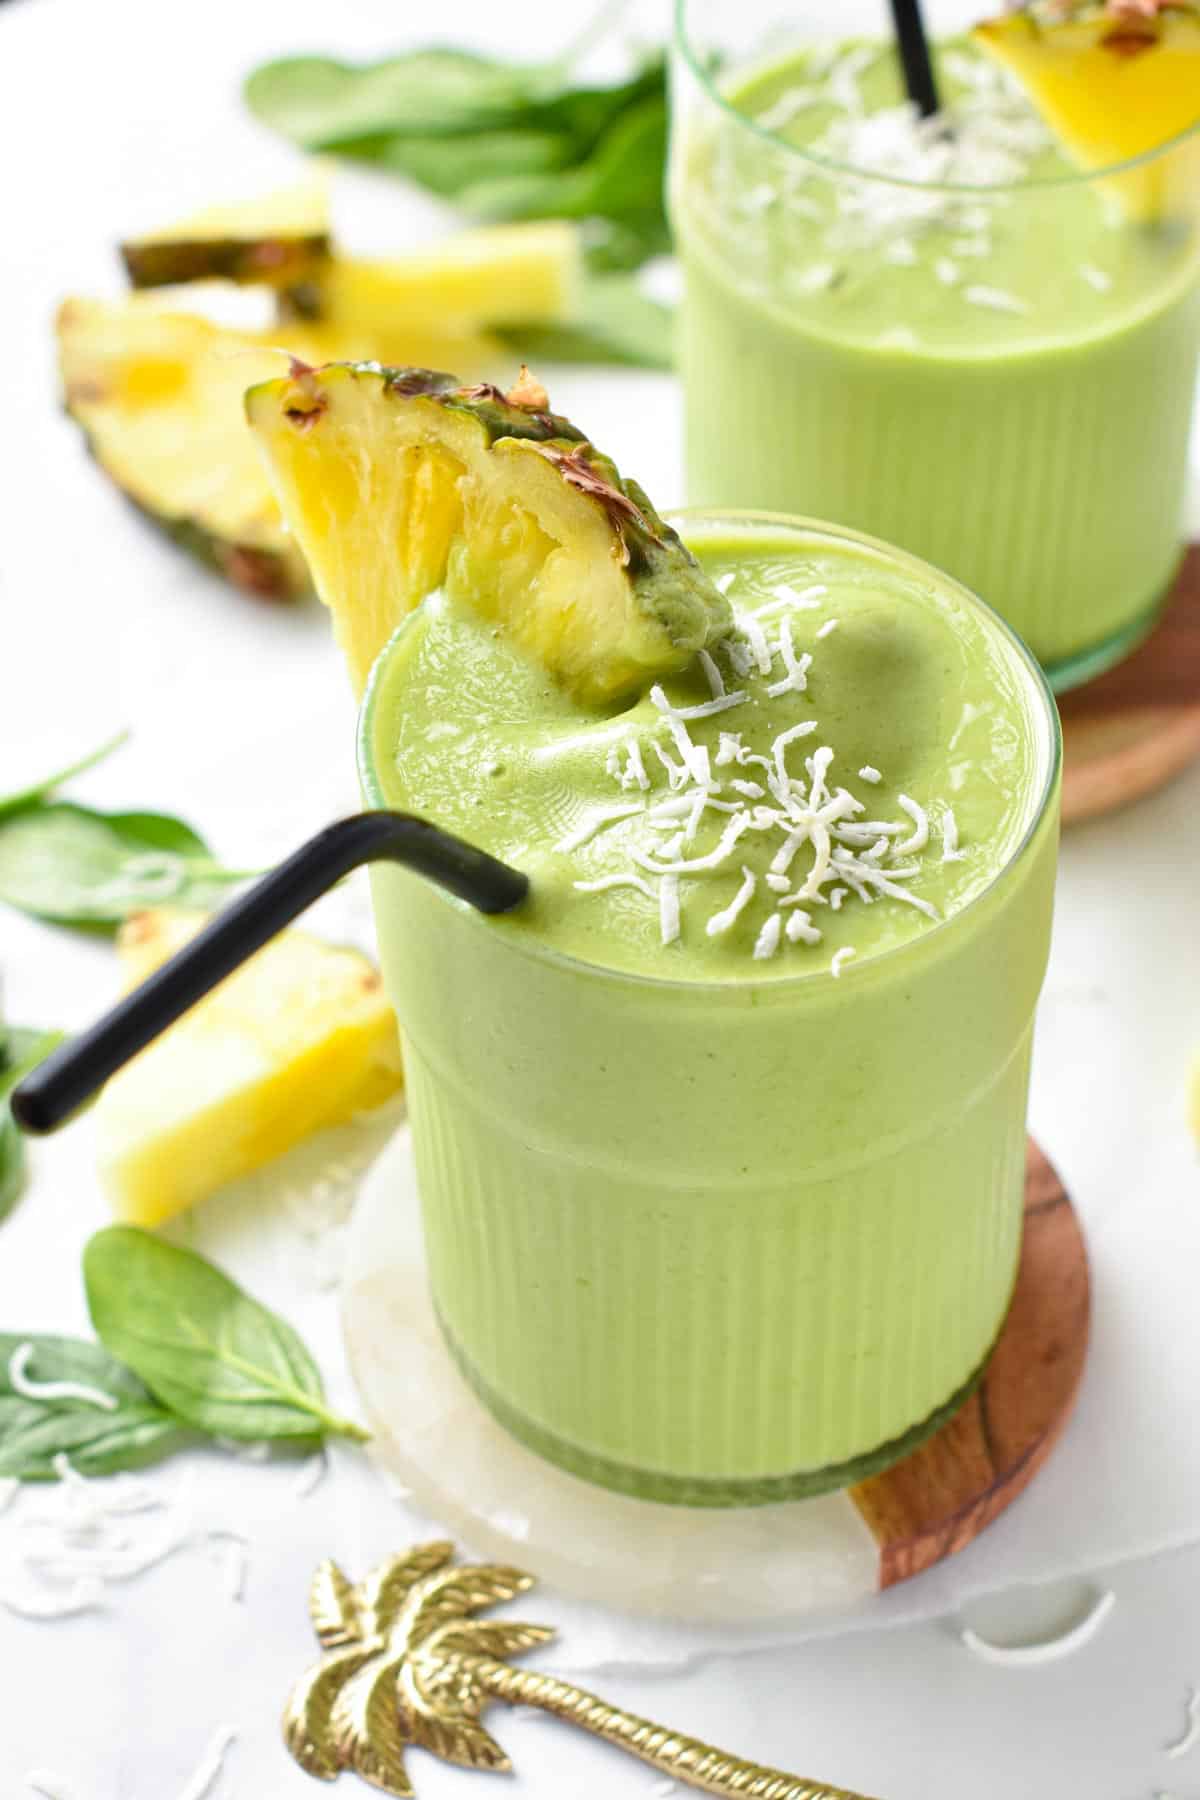 This Spinach Pineapple Banana Smoothie is a delicious easy green smoothie packed with tropical flavors and nutrients from spinach.